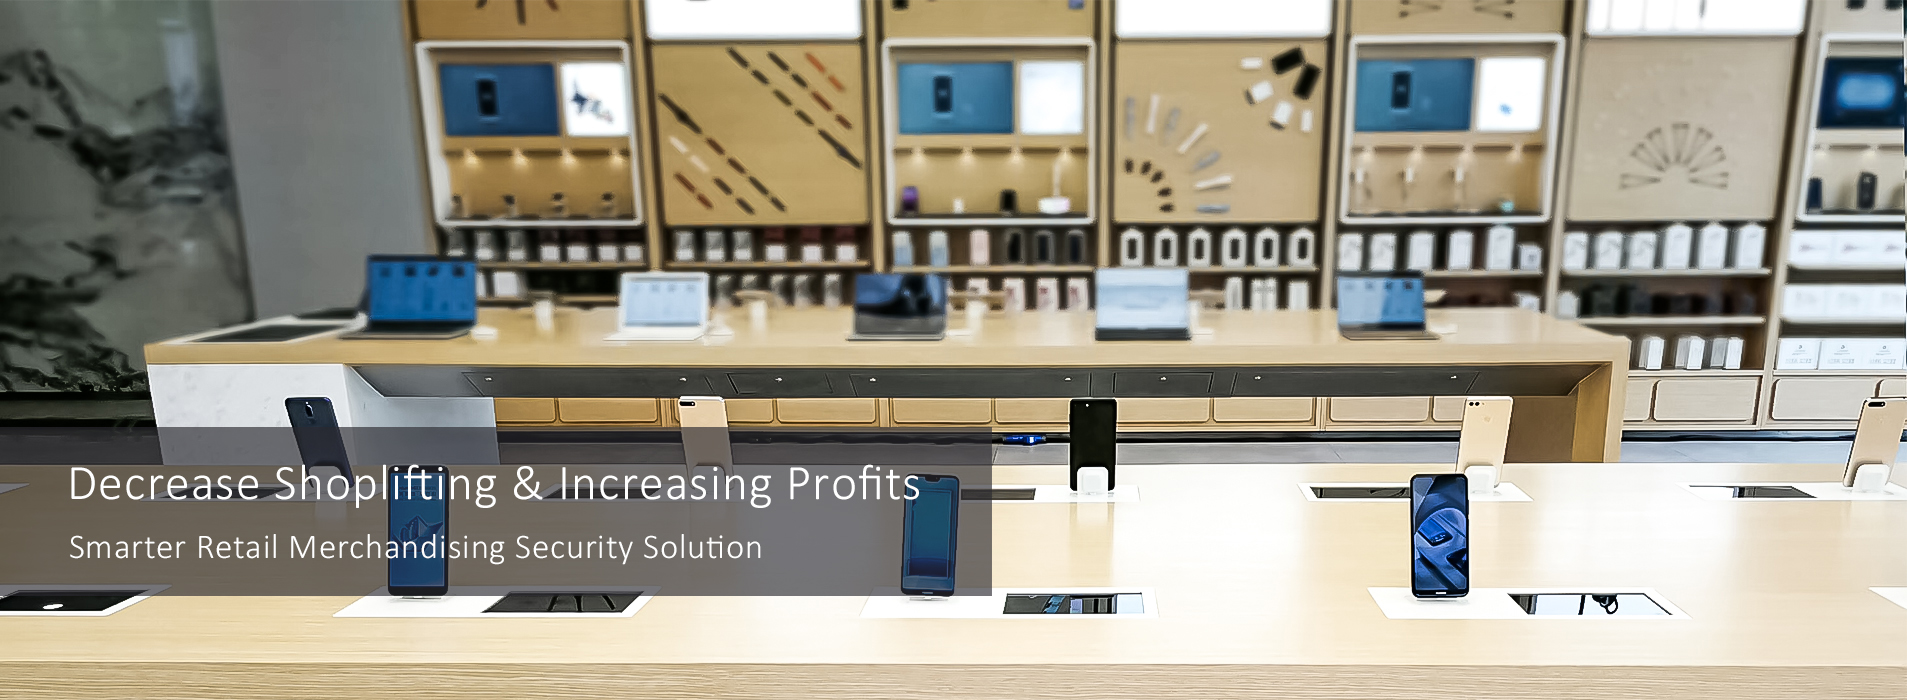 Smarter Retail Merchandising Security Solution for Retail Electronic Store